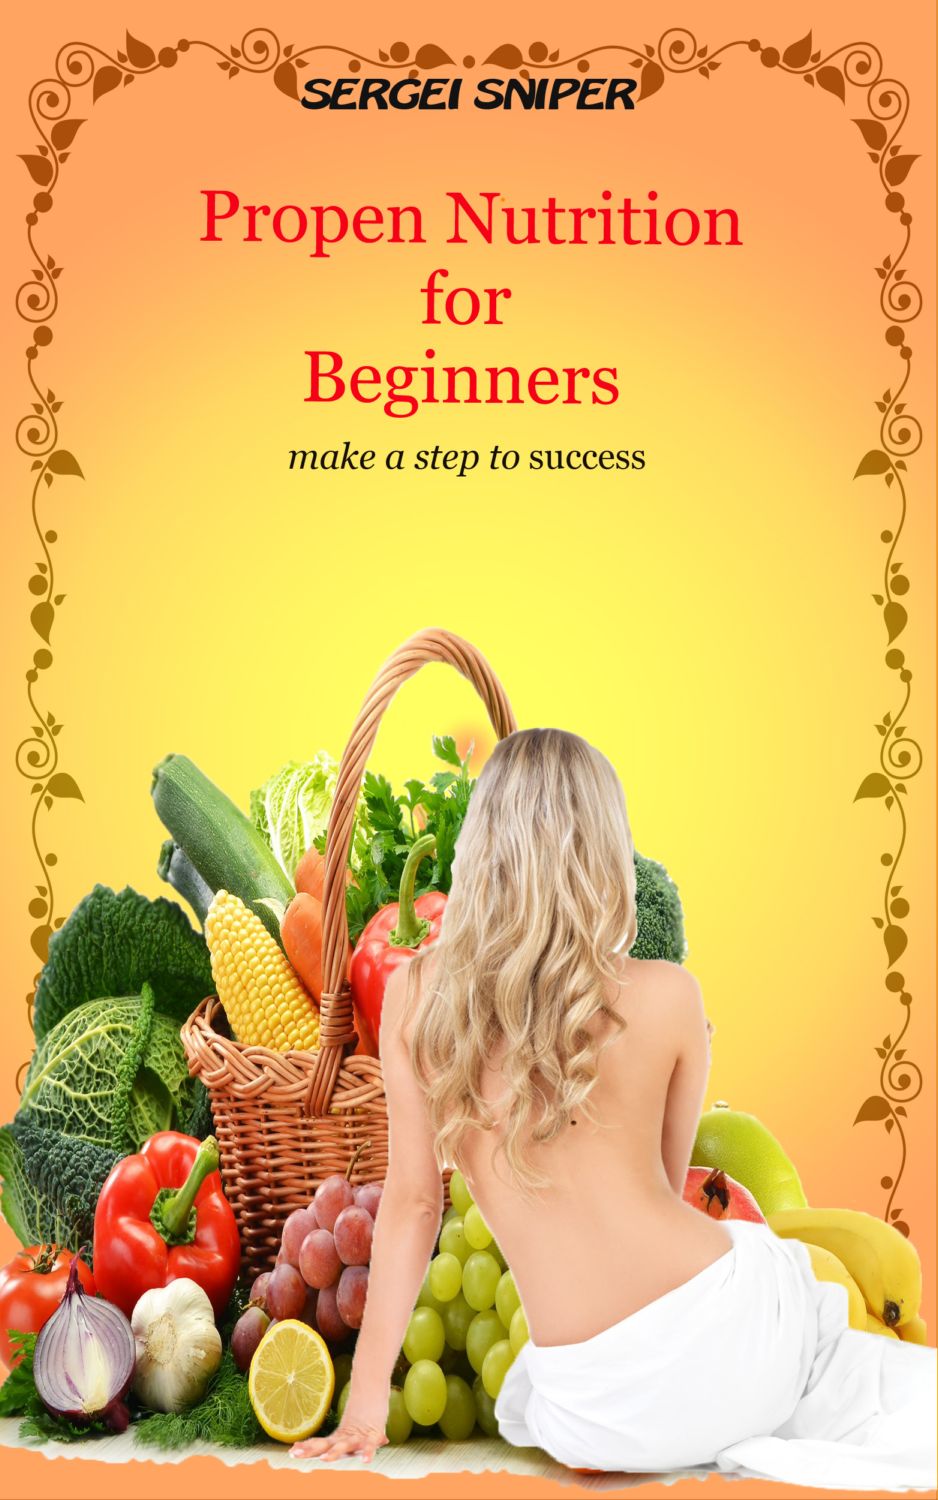 FREE: Proper Nutrition for Beginners by Sergei Sniper